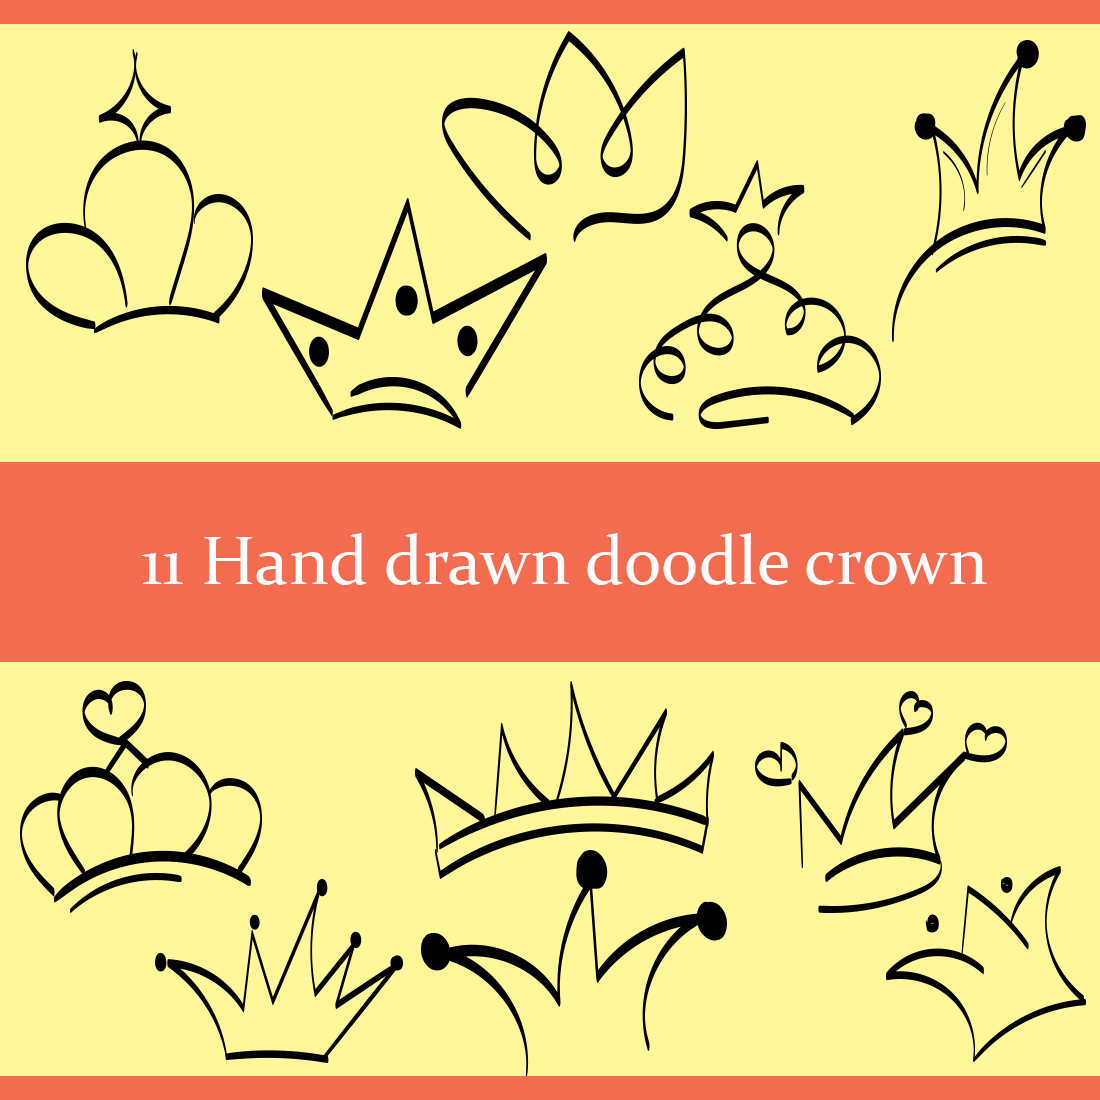 11 Hand Drawn Doodle Crowns - Only $5 cover image.